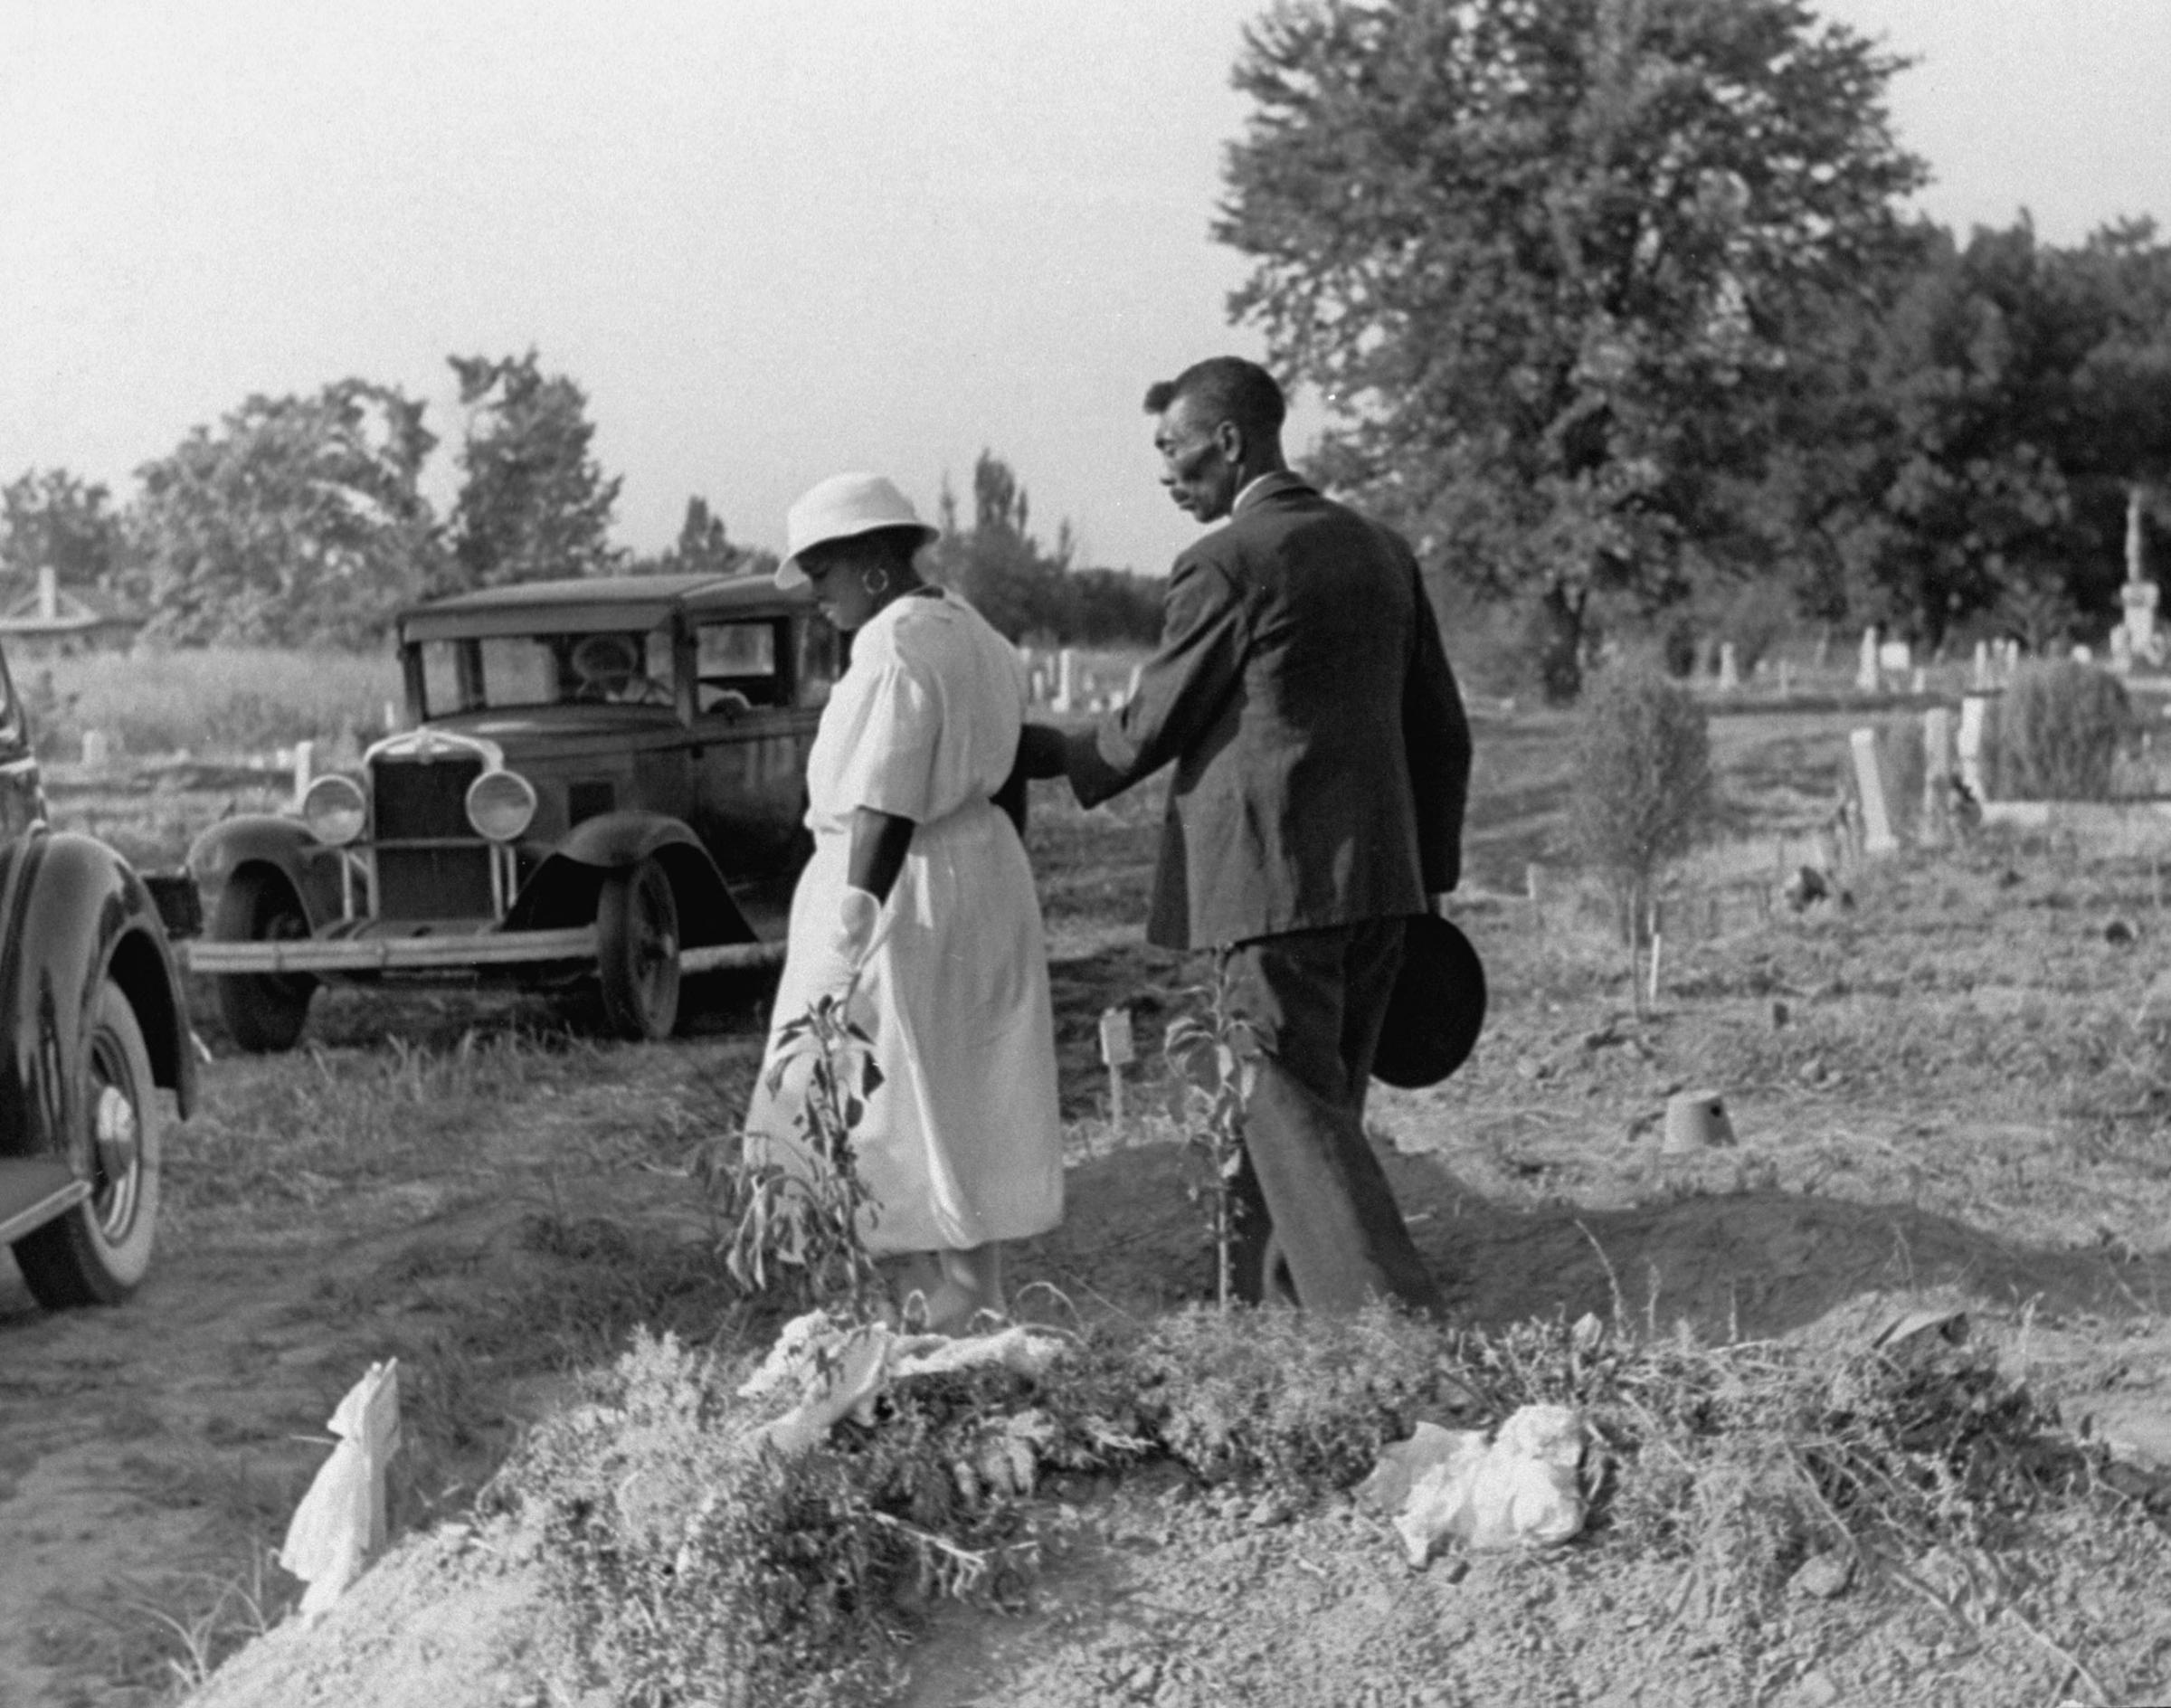 Grieving widow being escorted from the gravesite of her late husband after his burial service, Mississippi, 1936.